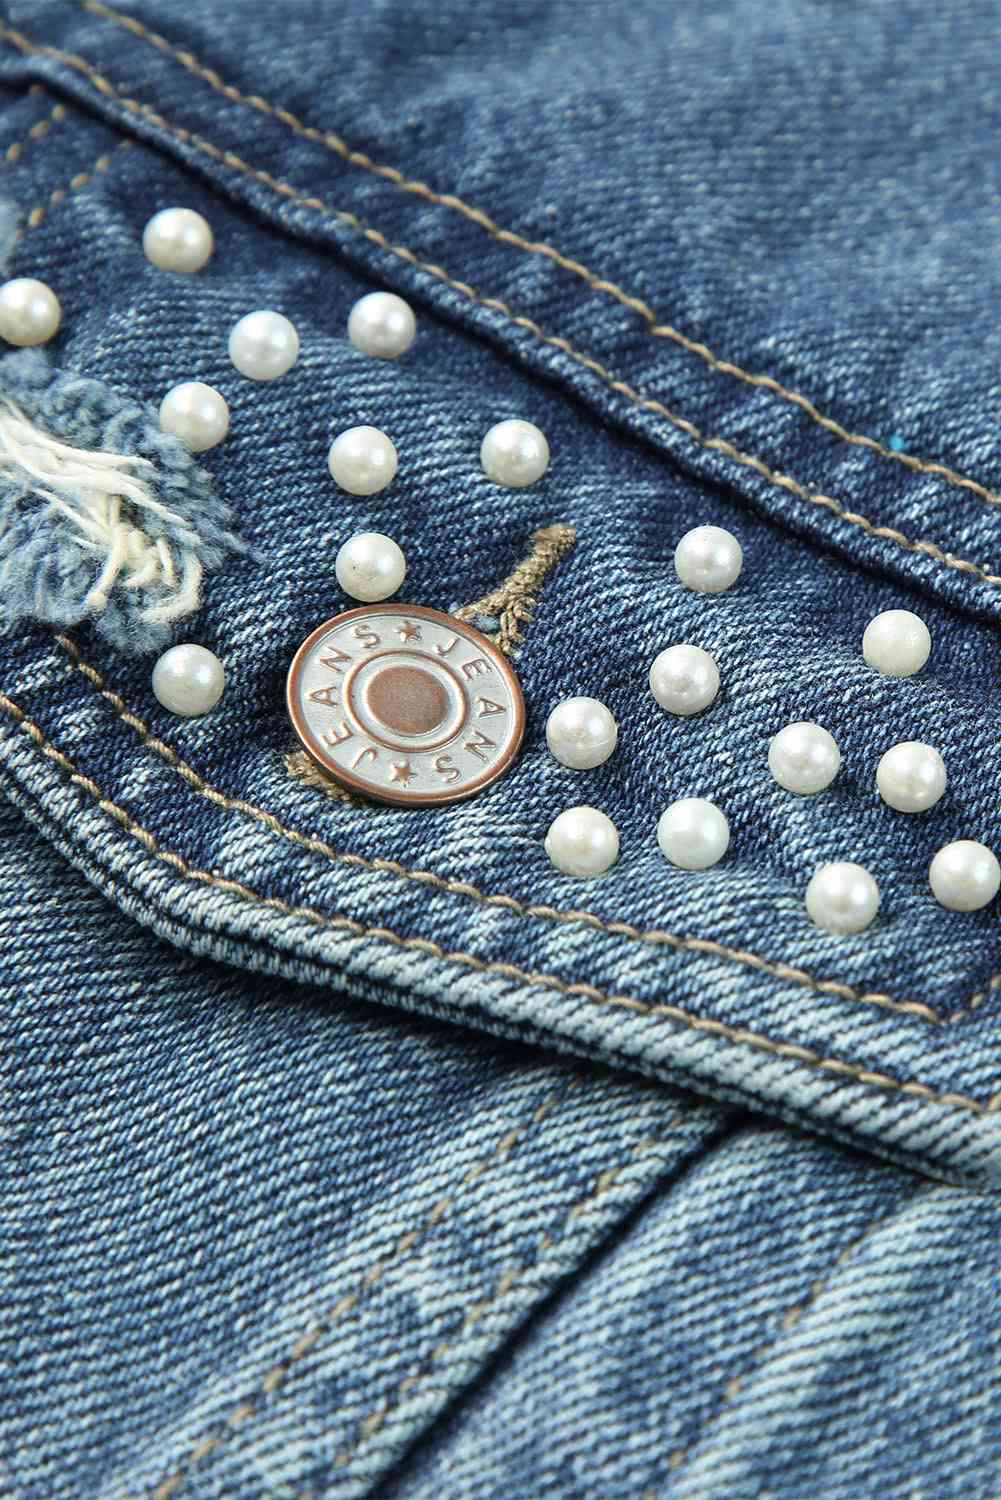 Pearl Detail Distressed Button Up Denim Jacket - By Baano